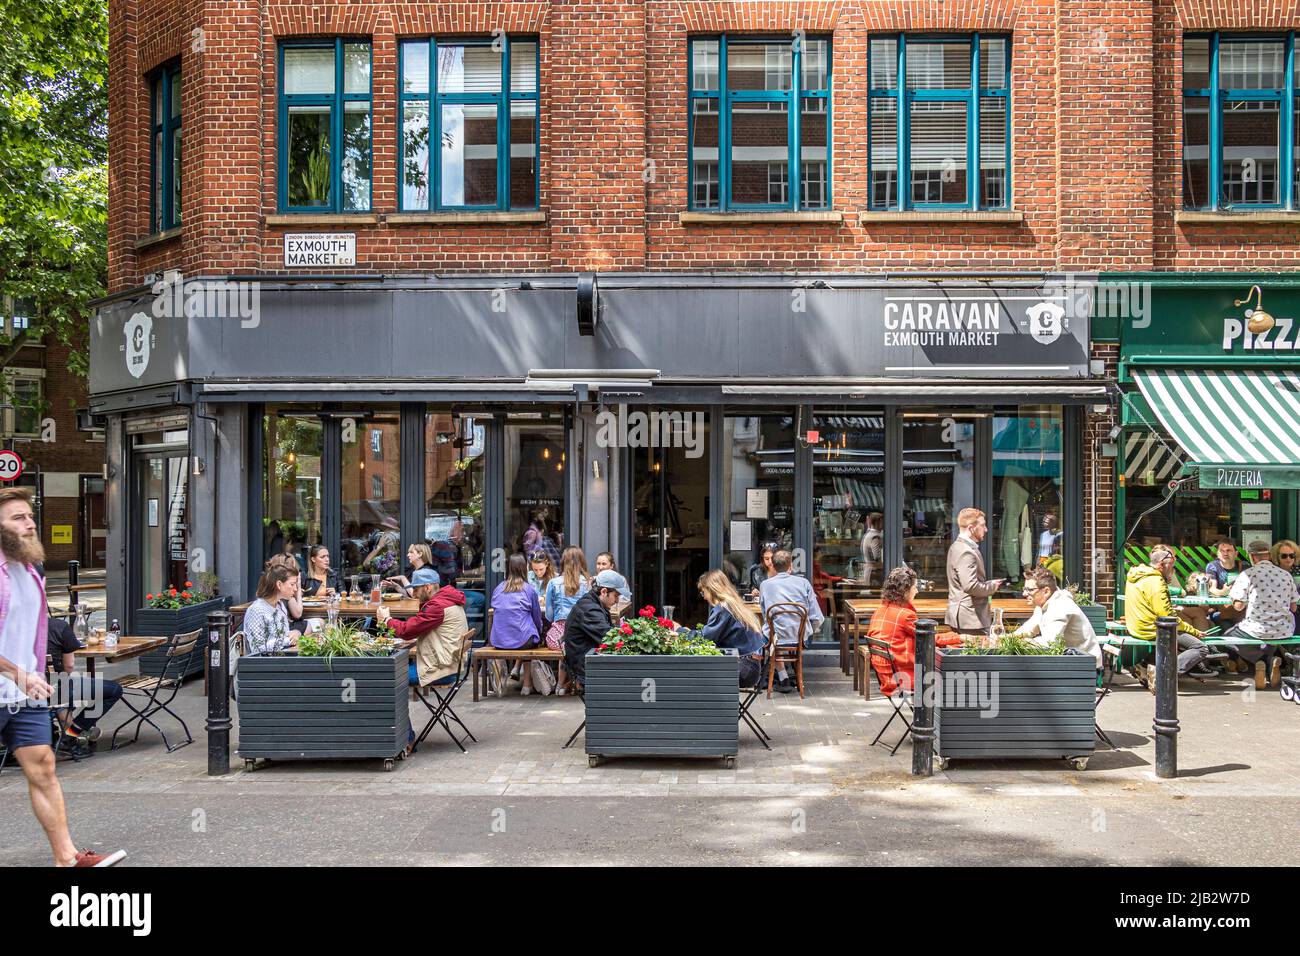 People sitting outside Caravan a coffee shop,  restaurant and bar located on Exmouth Market, Clerkenwell ,London EC1 Stock Photo